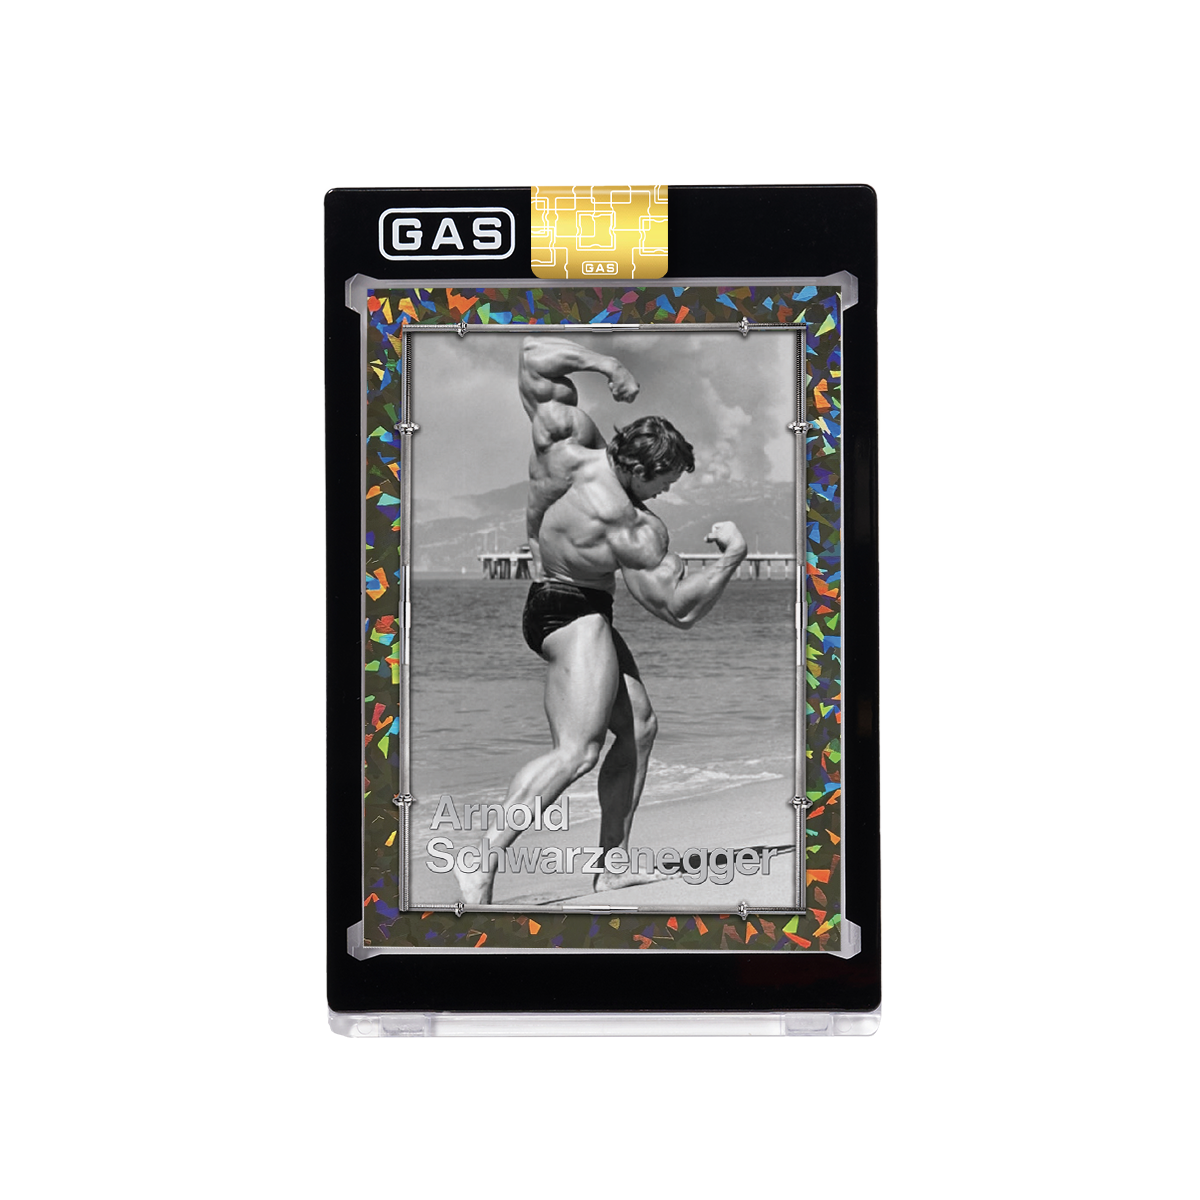 Limited Edition Foil Arnold Schwarzenegger Built to Perfection  Deluxe GAS Cracked Prism Trading Cards Tin Box Set